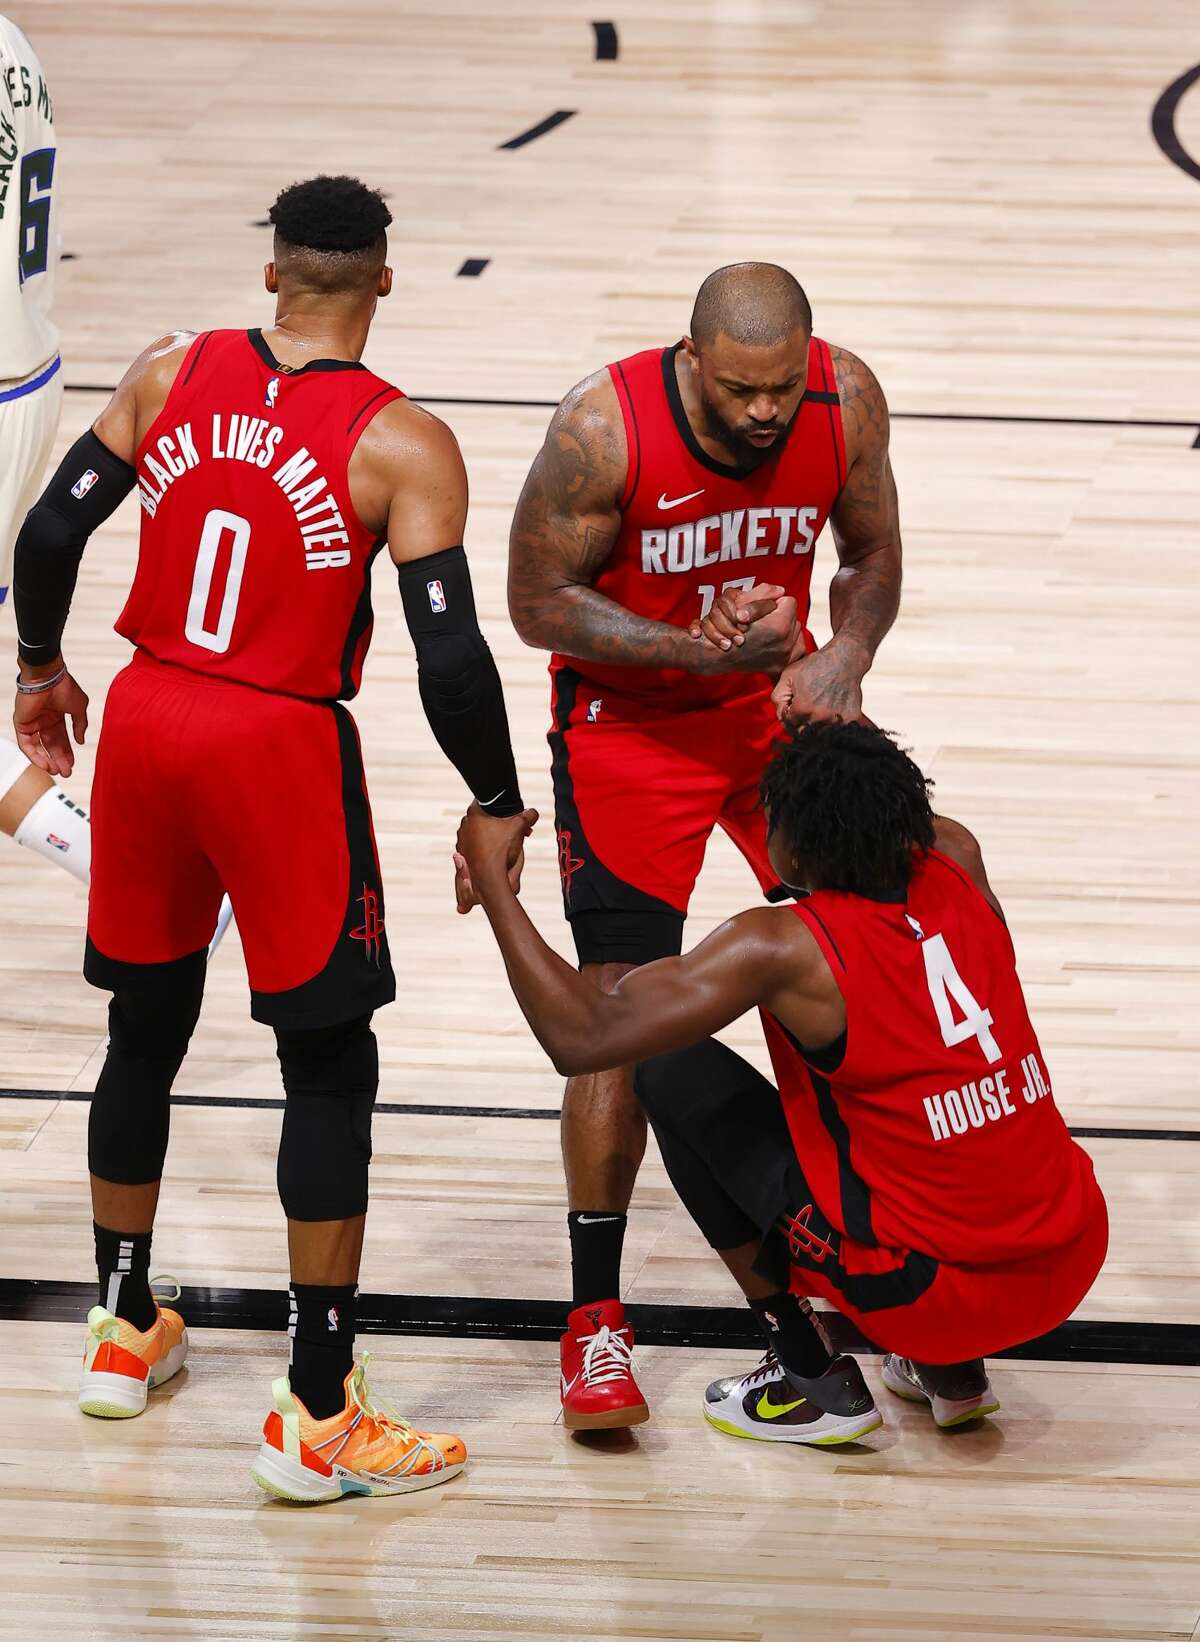 Houston Rockets' Danuel House Jr. (4) is helped up by teammates Russell Westbrook, left, and P.J. Tucker during the team's NBA basketball game against the Milwaukee Bucks on Sunday, Aug. 2, 2020, in Lake Buena Vista, Fla. (Mike Ehrmann/Pool Photo via AP)